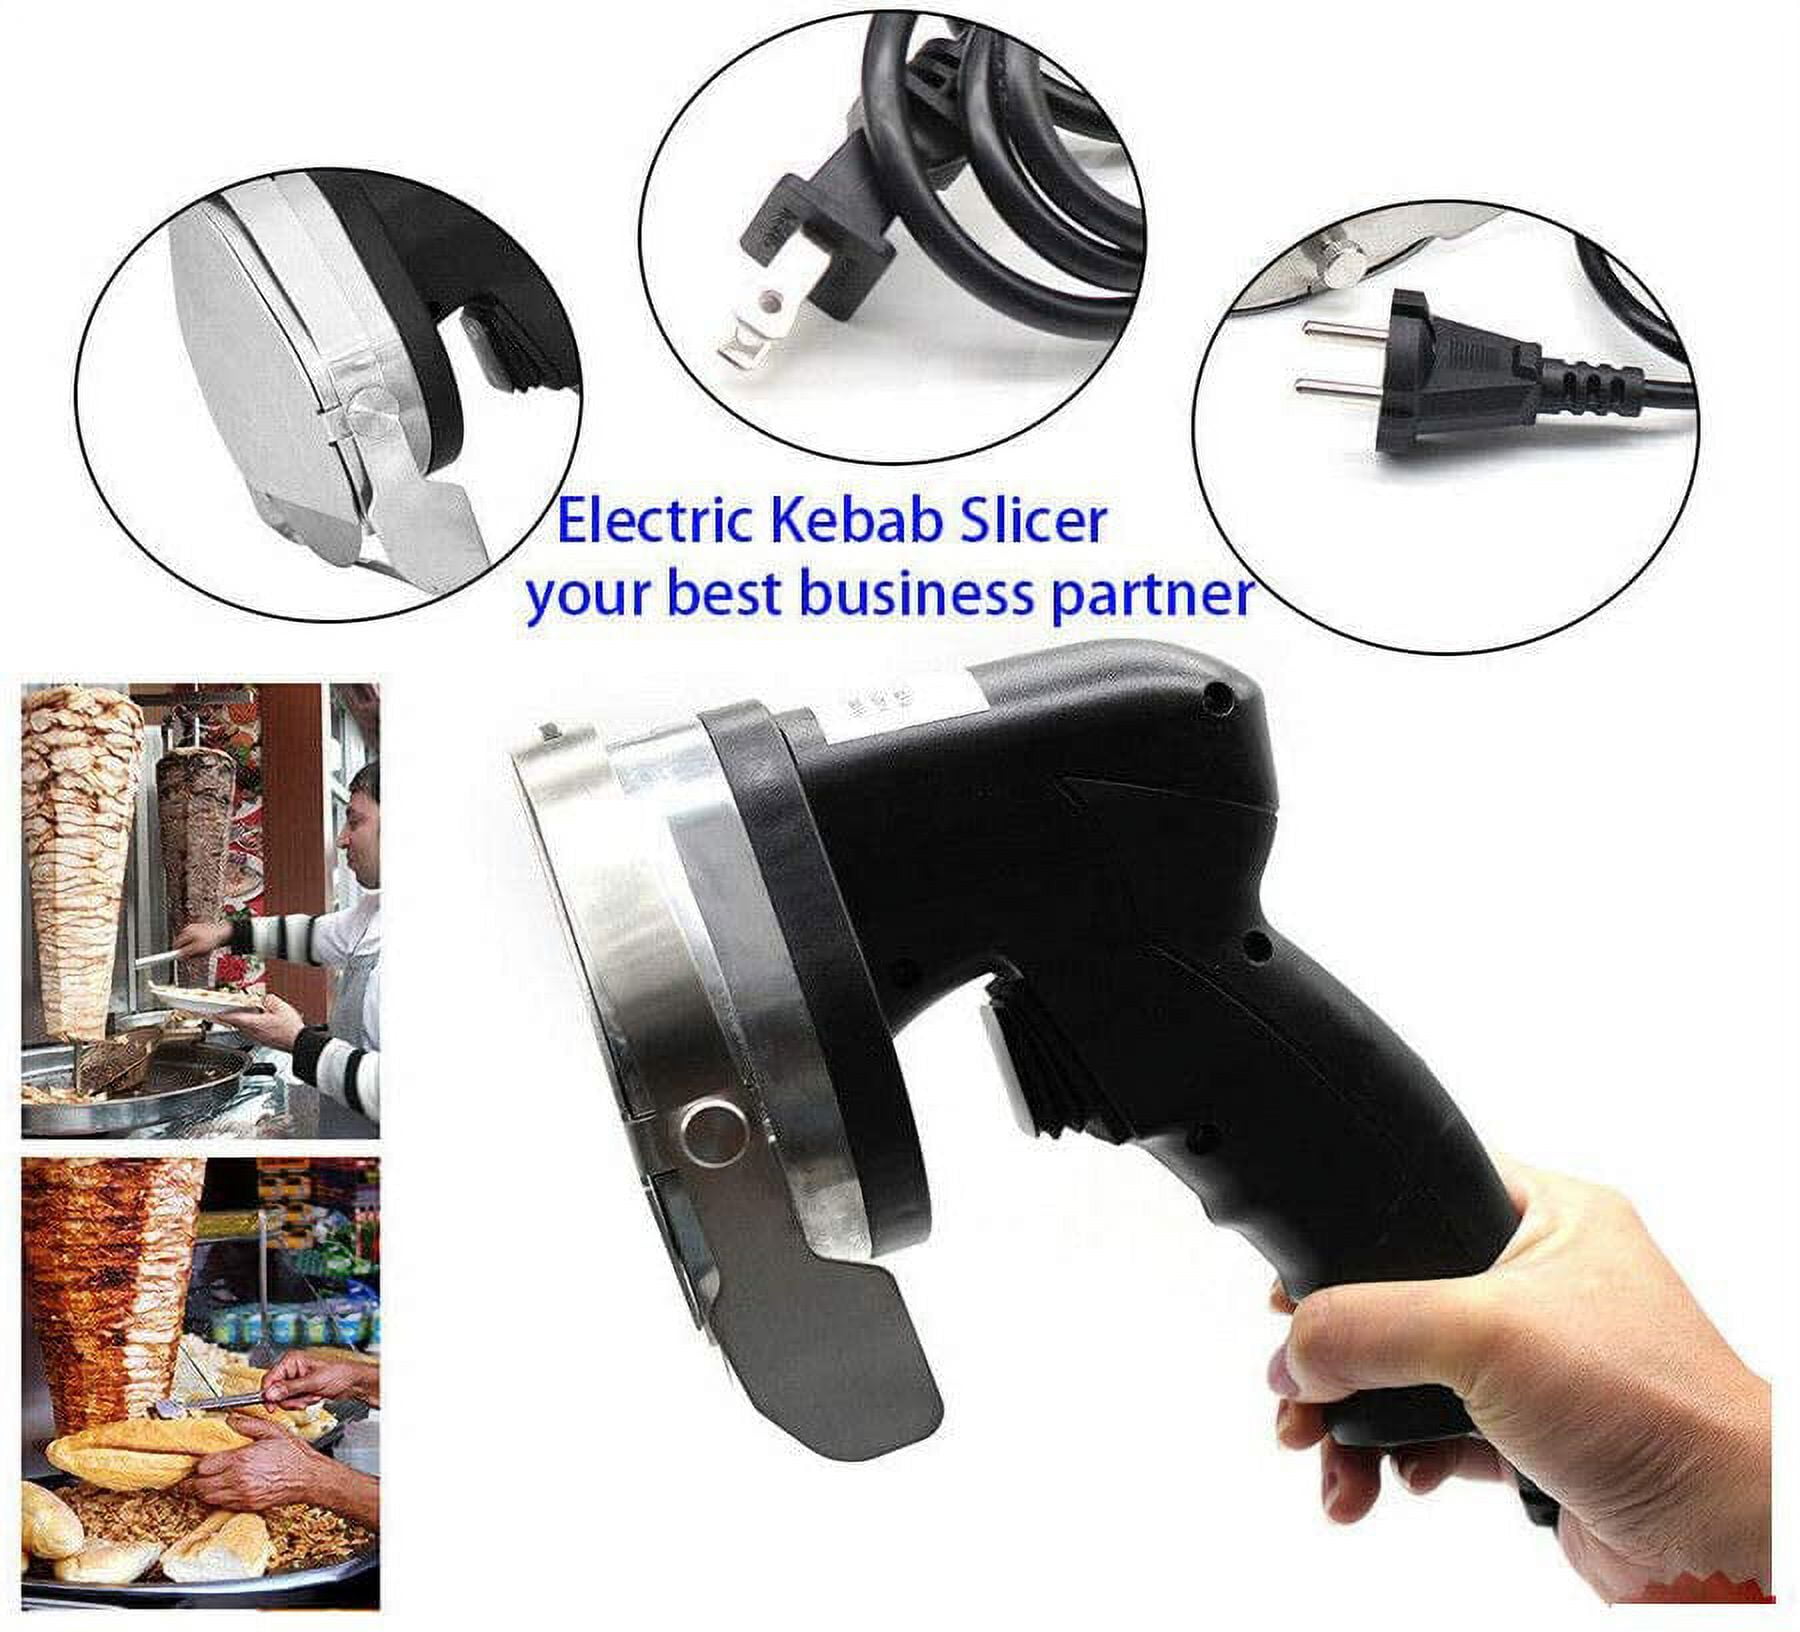  Portable Electric Carving Knives Kebab Meat Slicers, Shawarma  Meat Cutter, 80W Turkish Kebab Slicer Gyro Cutter, 304 Stainless Steel, for  Commercial Home Use,RedCorded (Redcorded): Home & Kitchen